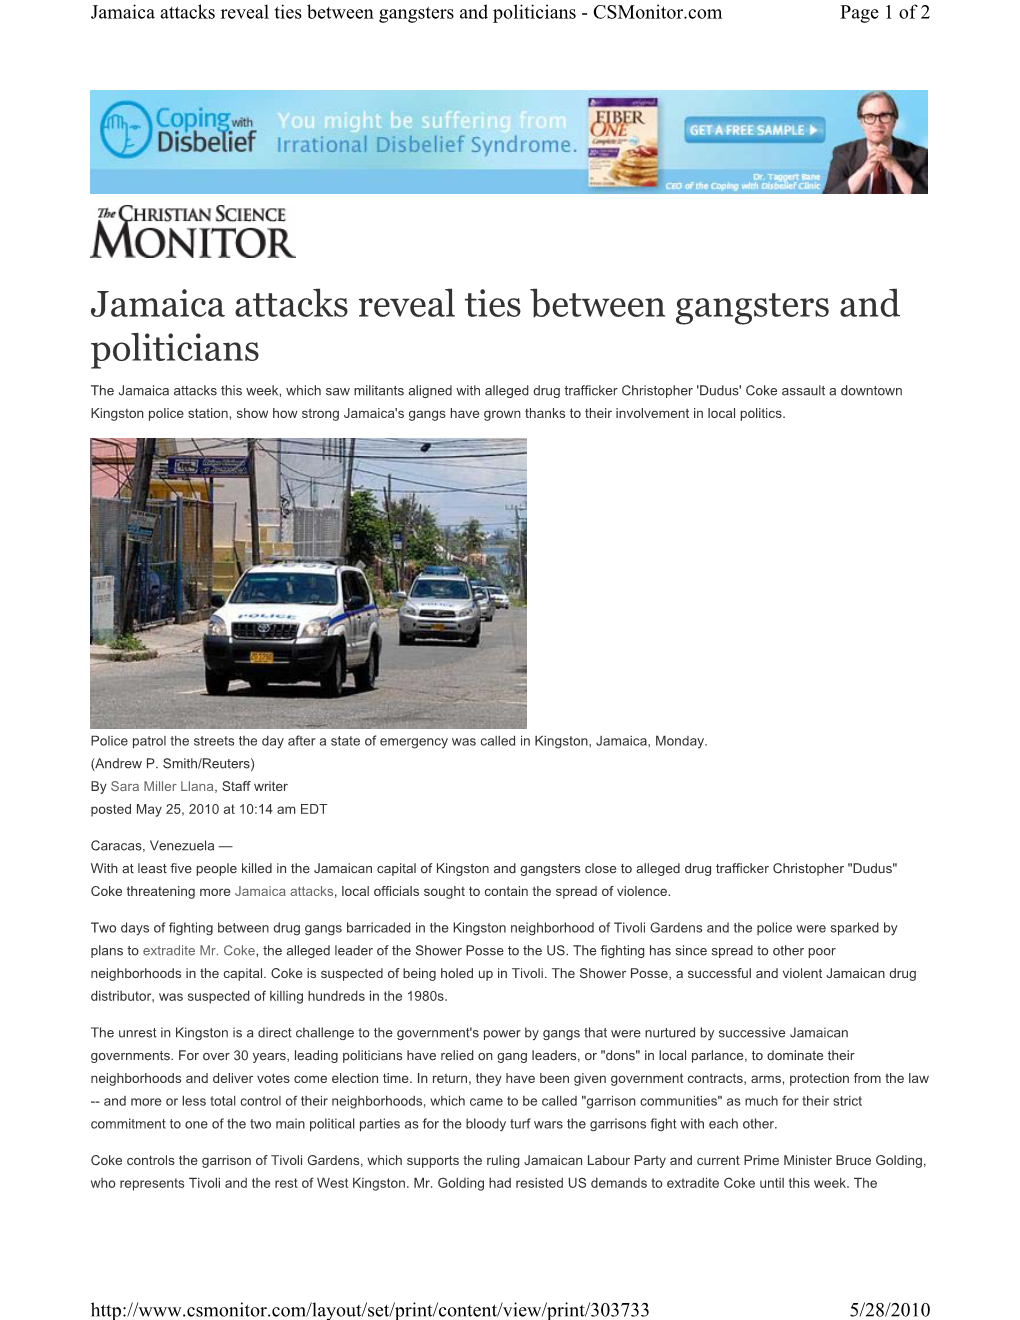 Jamaica Attacks Reveal Ties Between Gangsters and Politicians - Csmonitor.Com Page 1 of 2